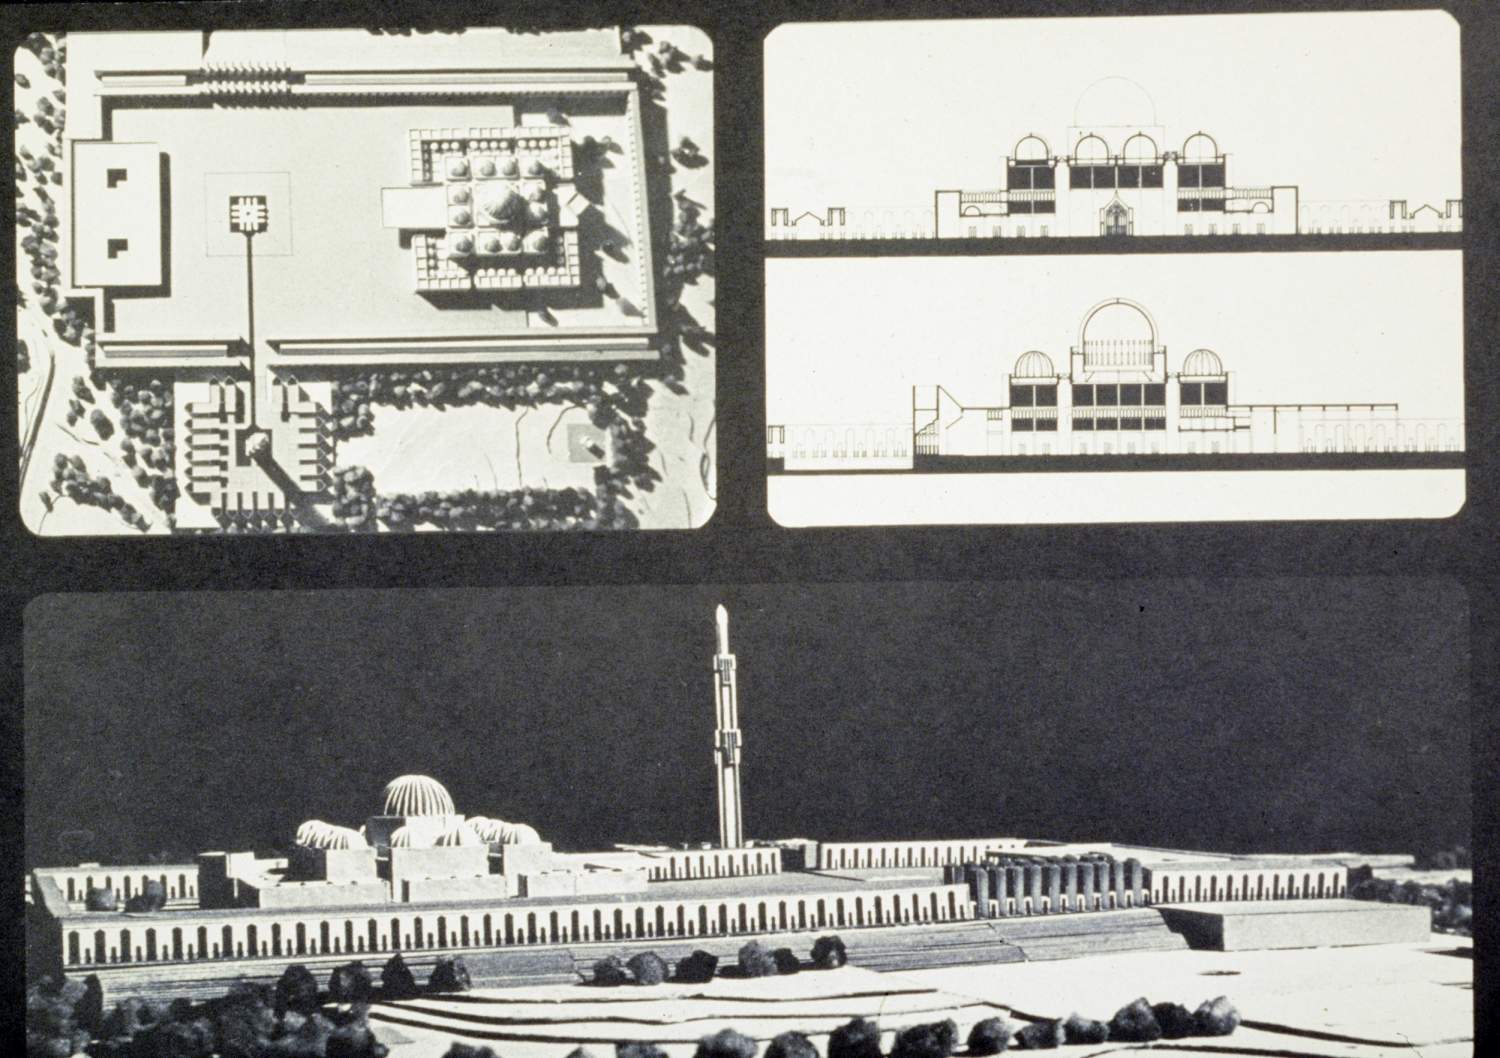 <p>Brochure panel showing plan, elevations, and model</p>